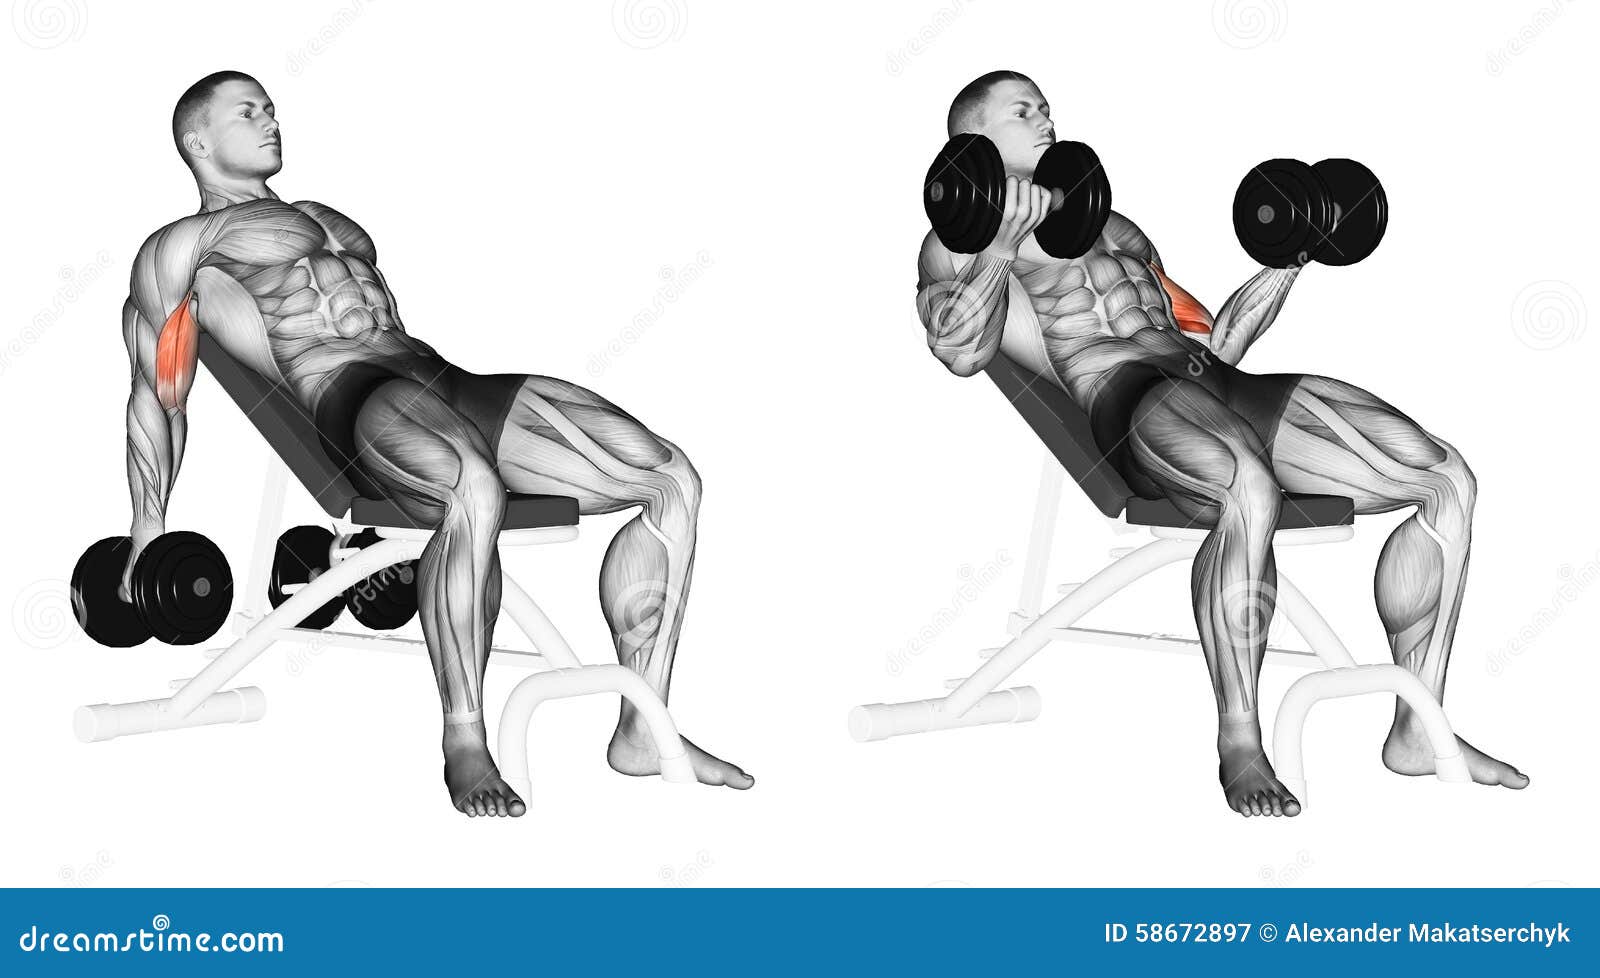 Exercising Lifting Dumbbells For Biceps Muscles On An Incline